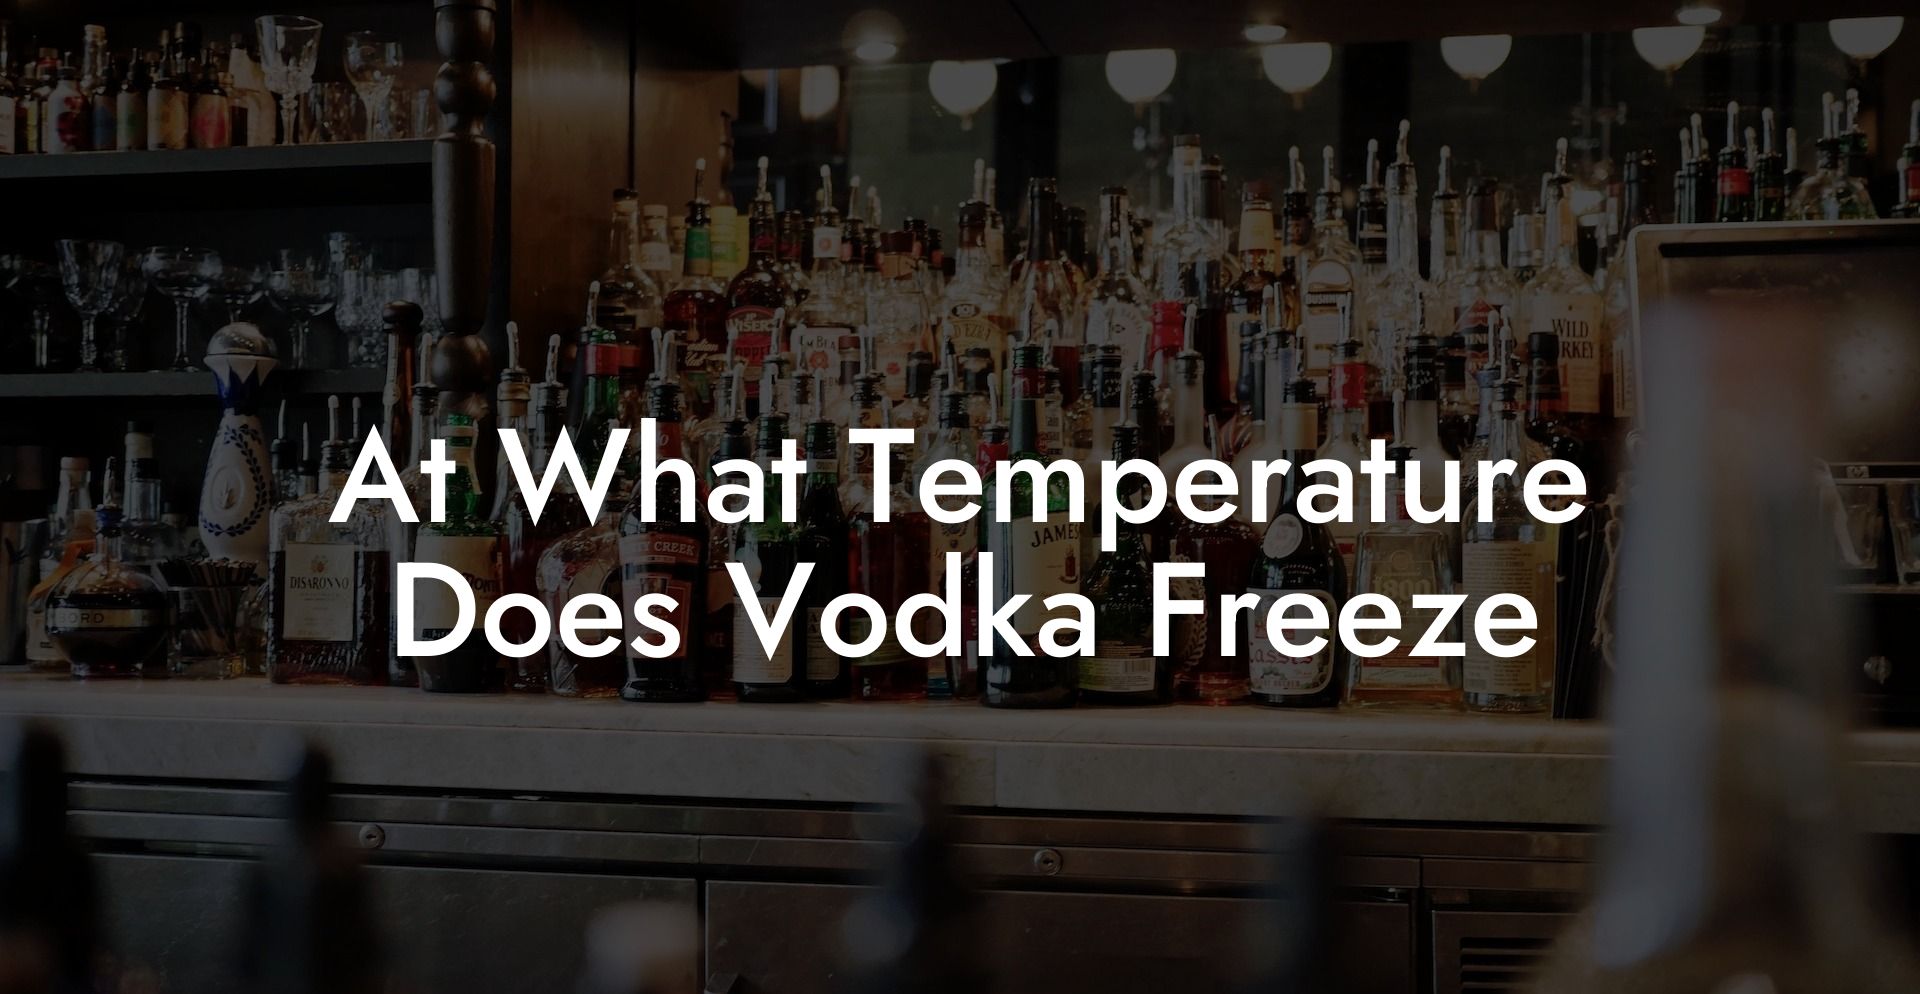 At What Temperature Does Vodka Freeze